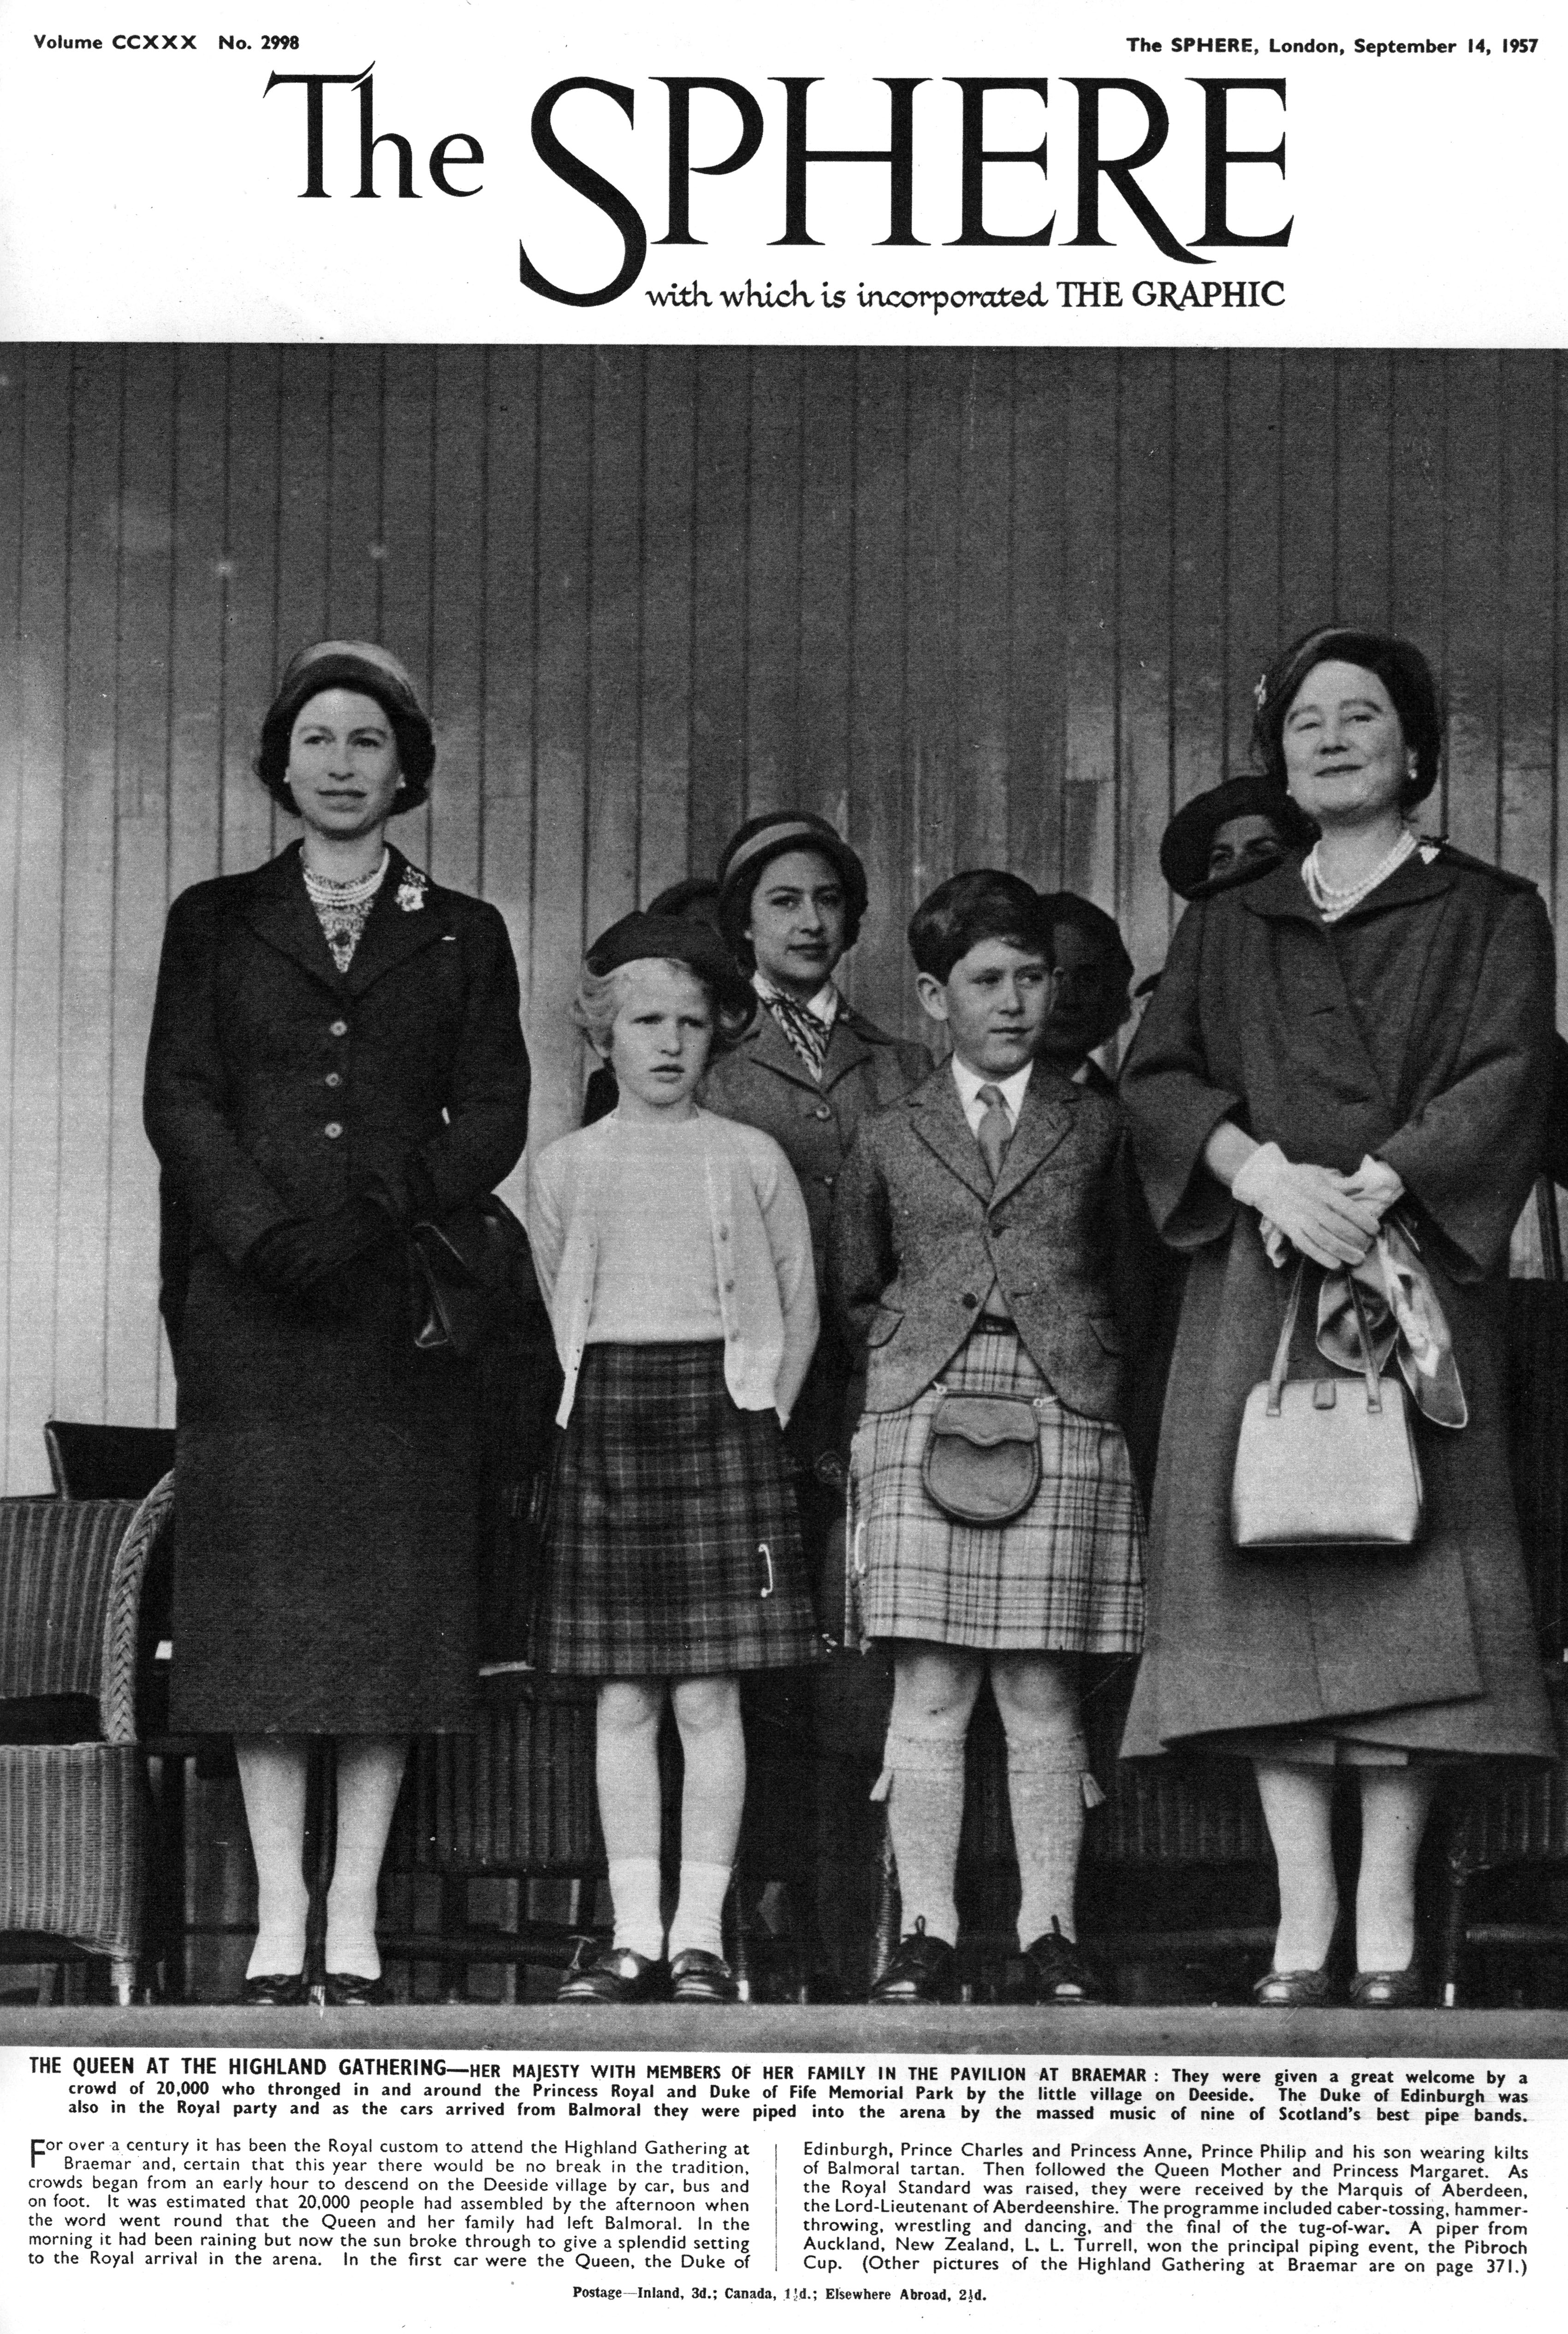 Queen Elizabeth Tribute - The Queen and her family at the Highland Gathering in Braemar in 1957